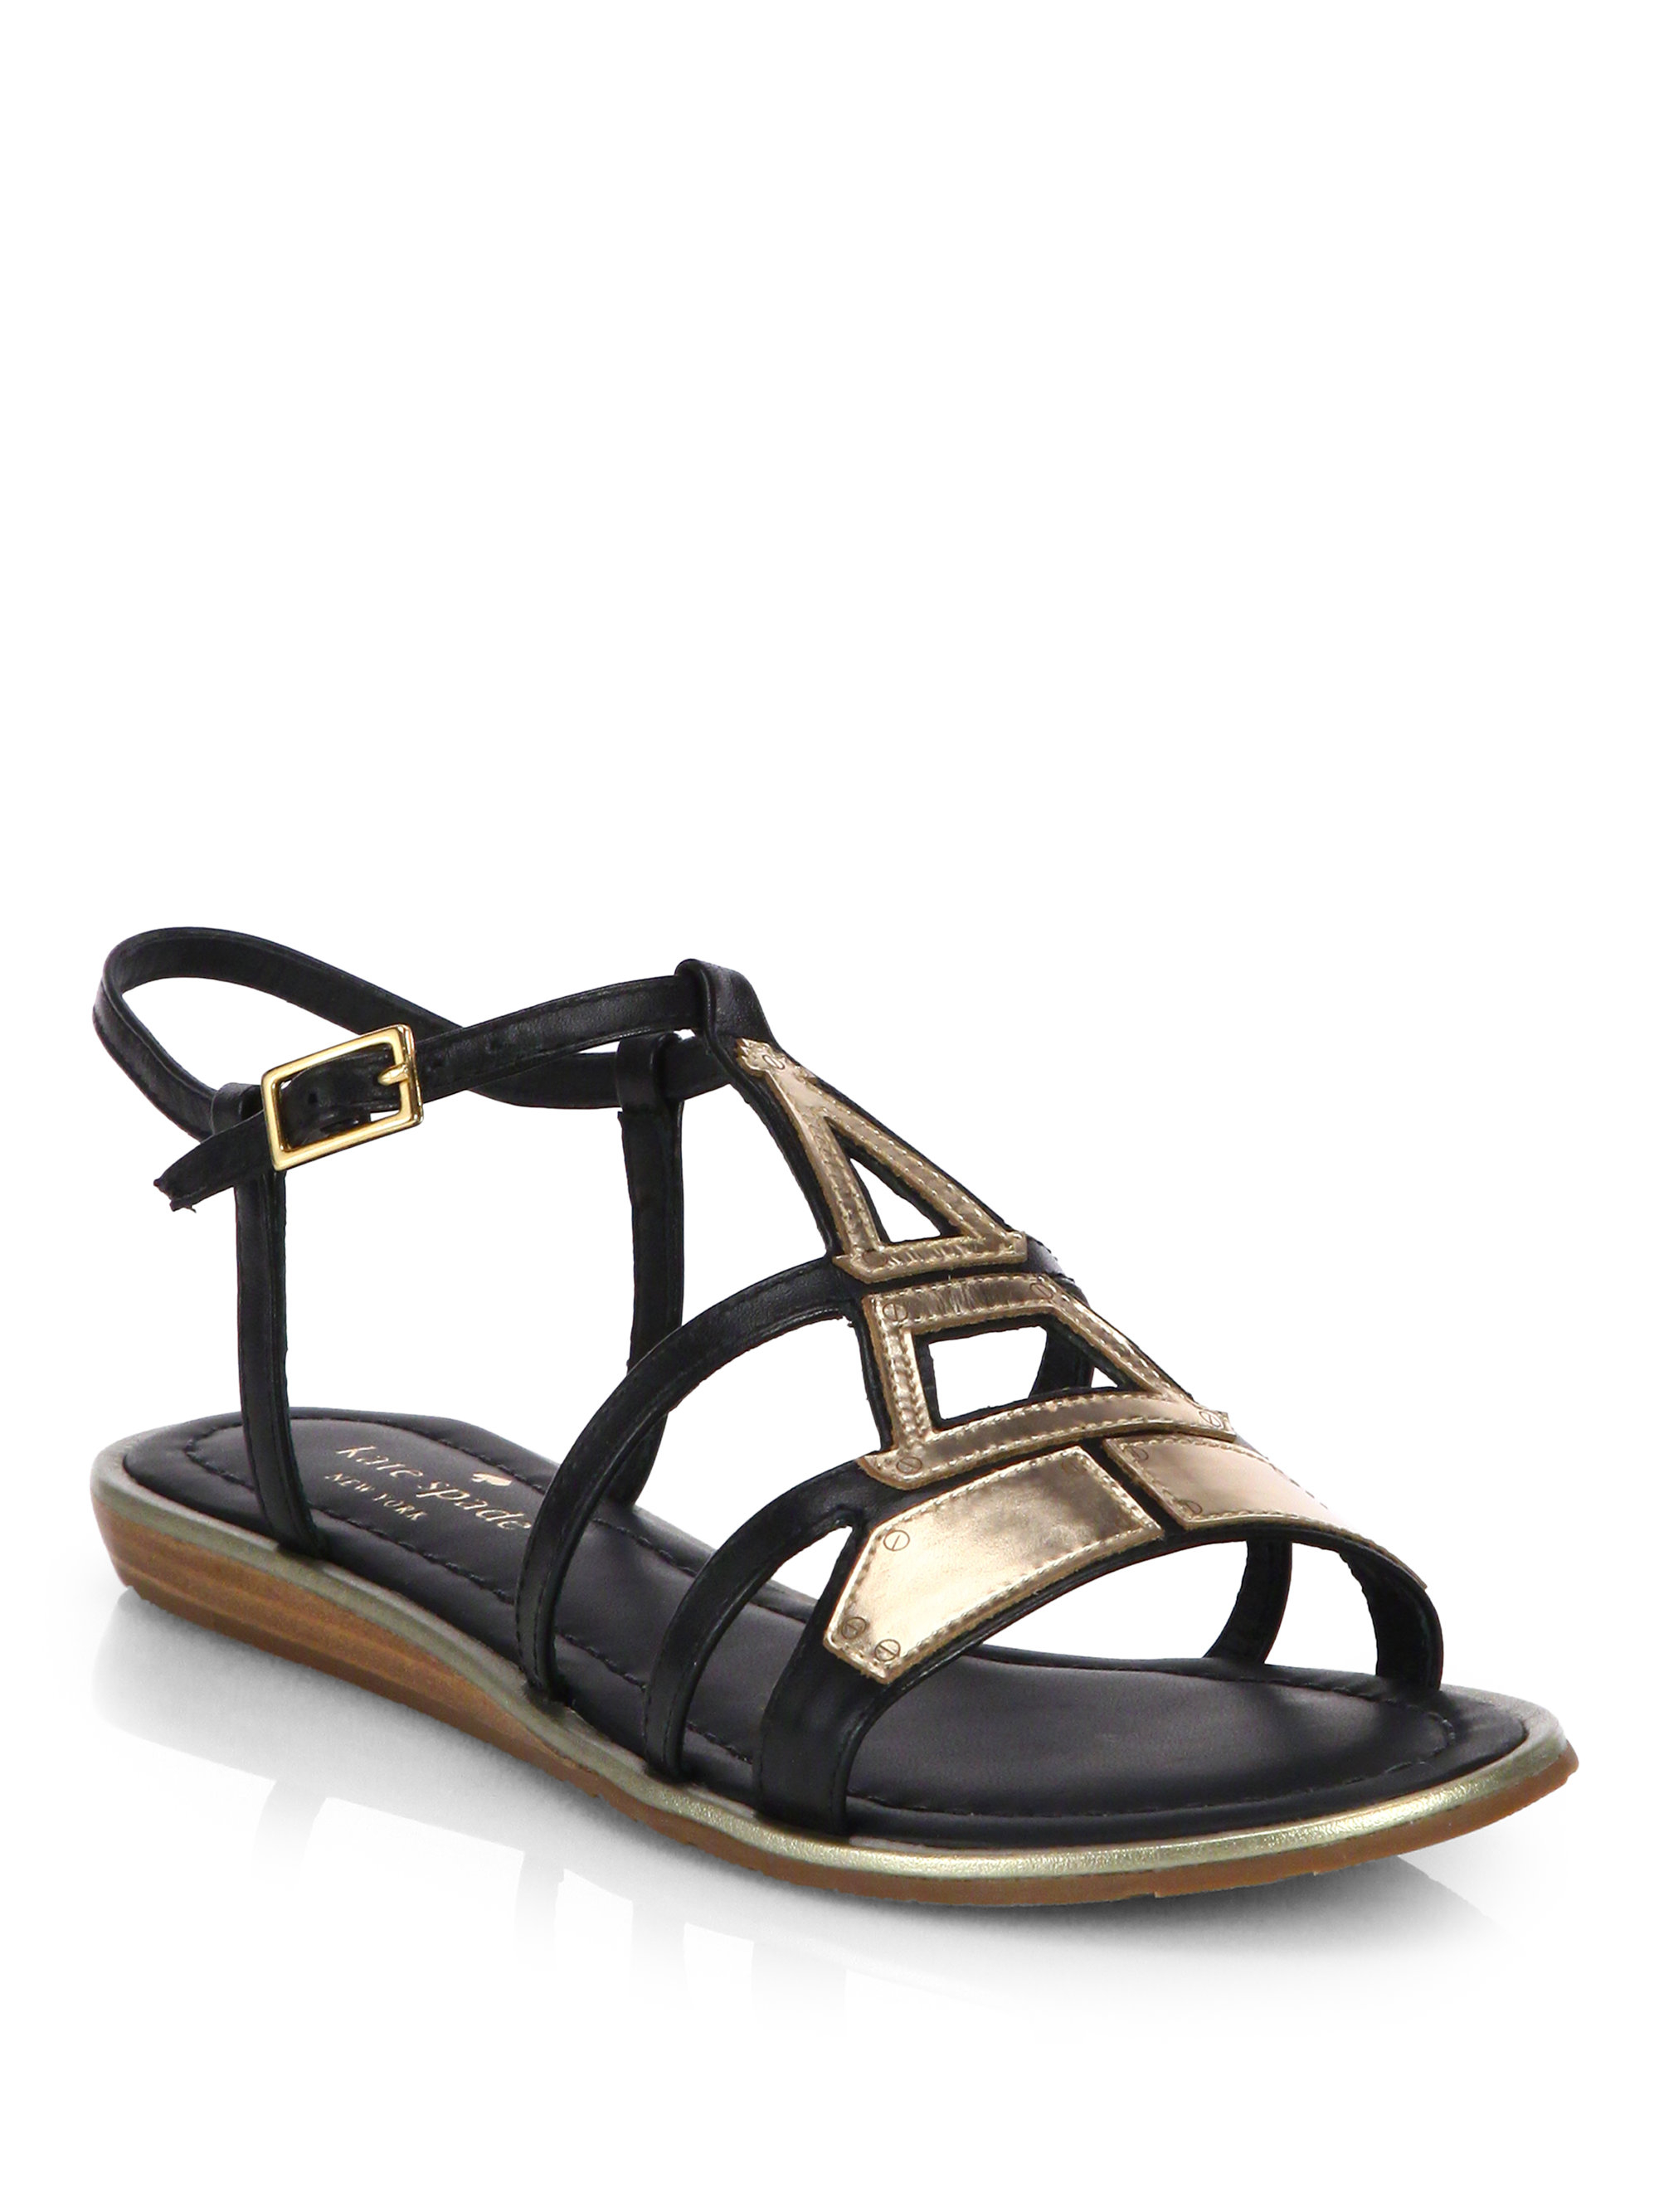 Kate Spade Adon Eiffel Tower Leather Sandals in Black | Lyst